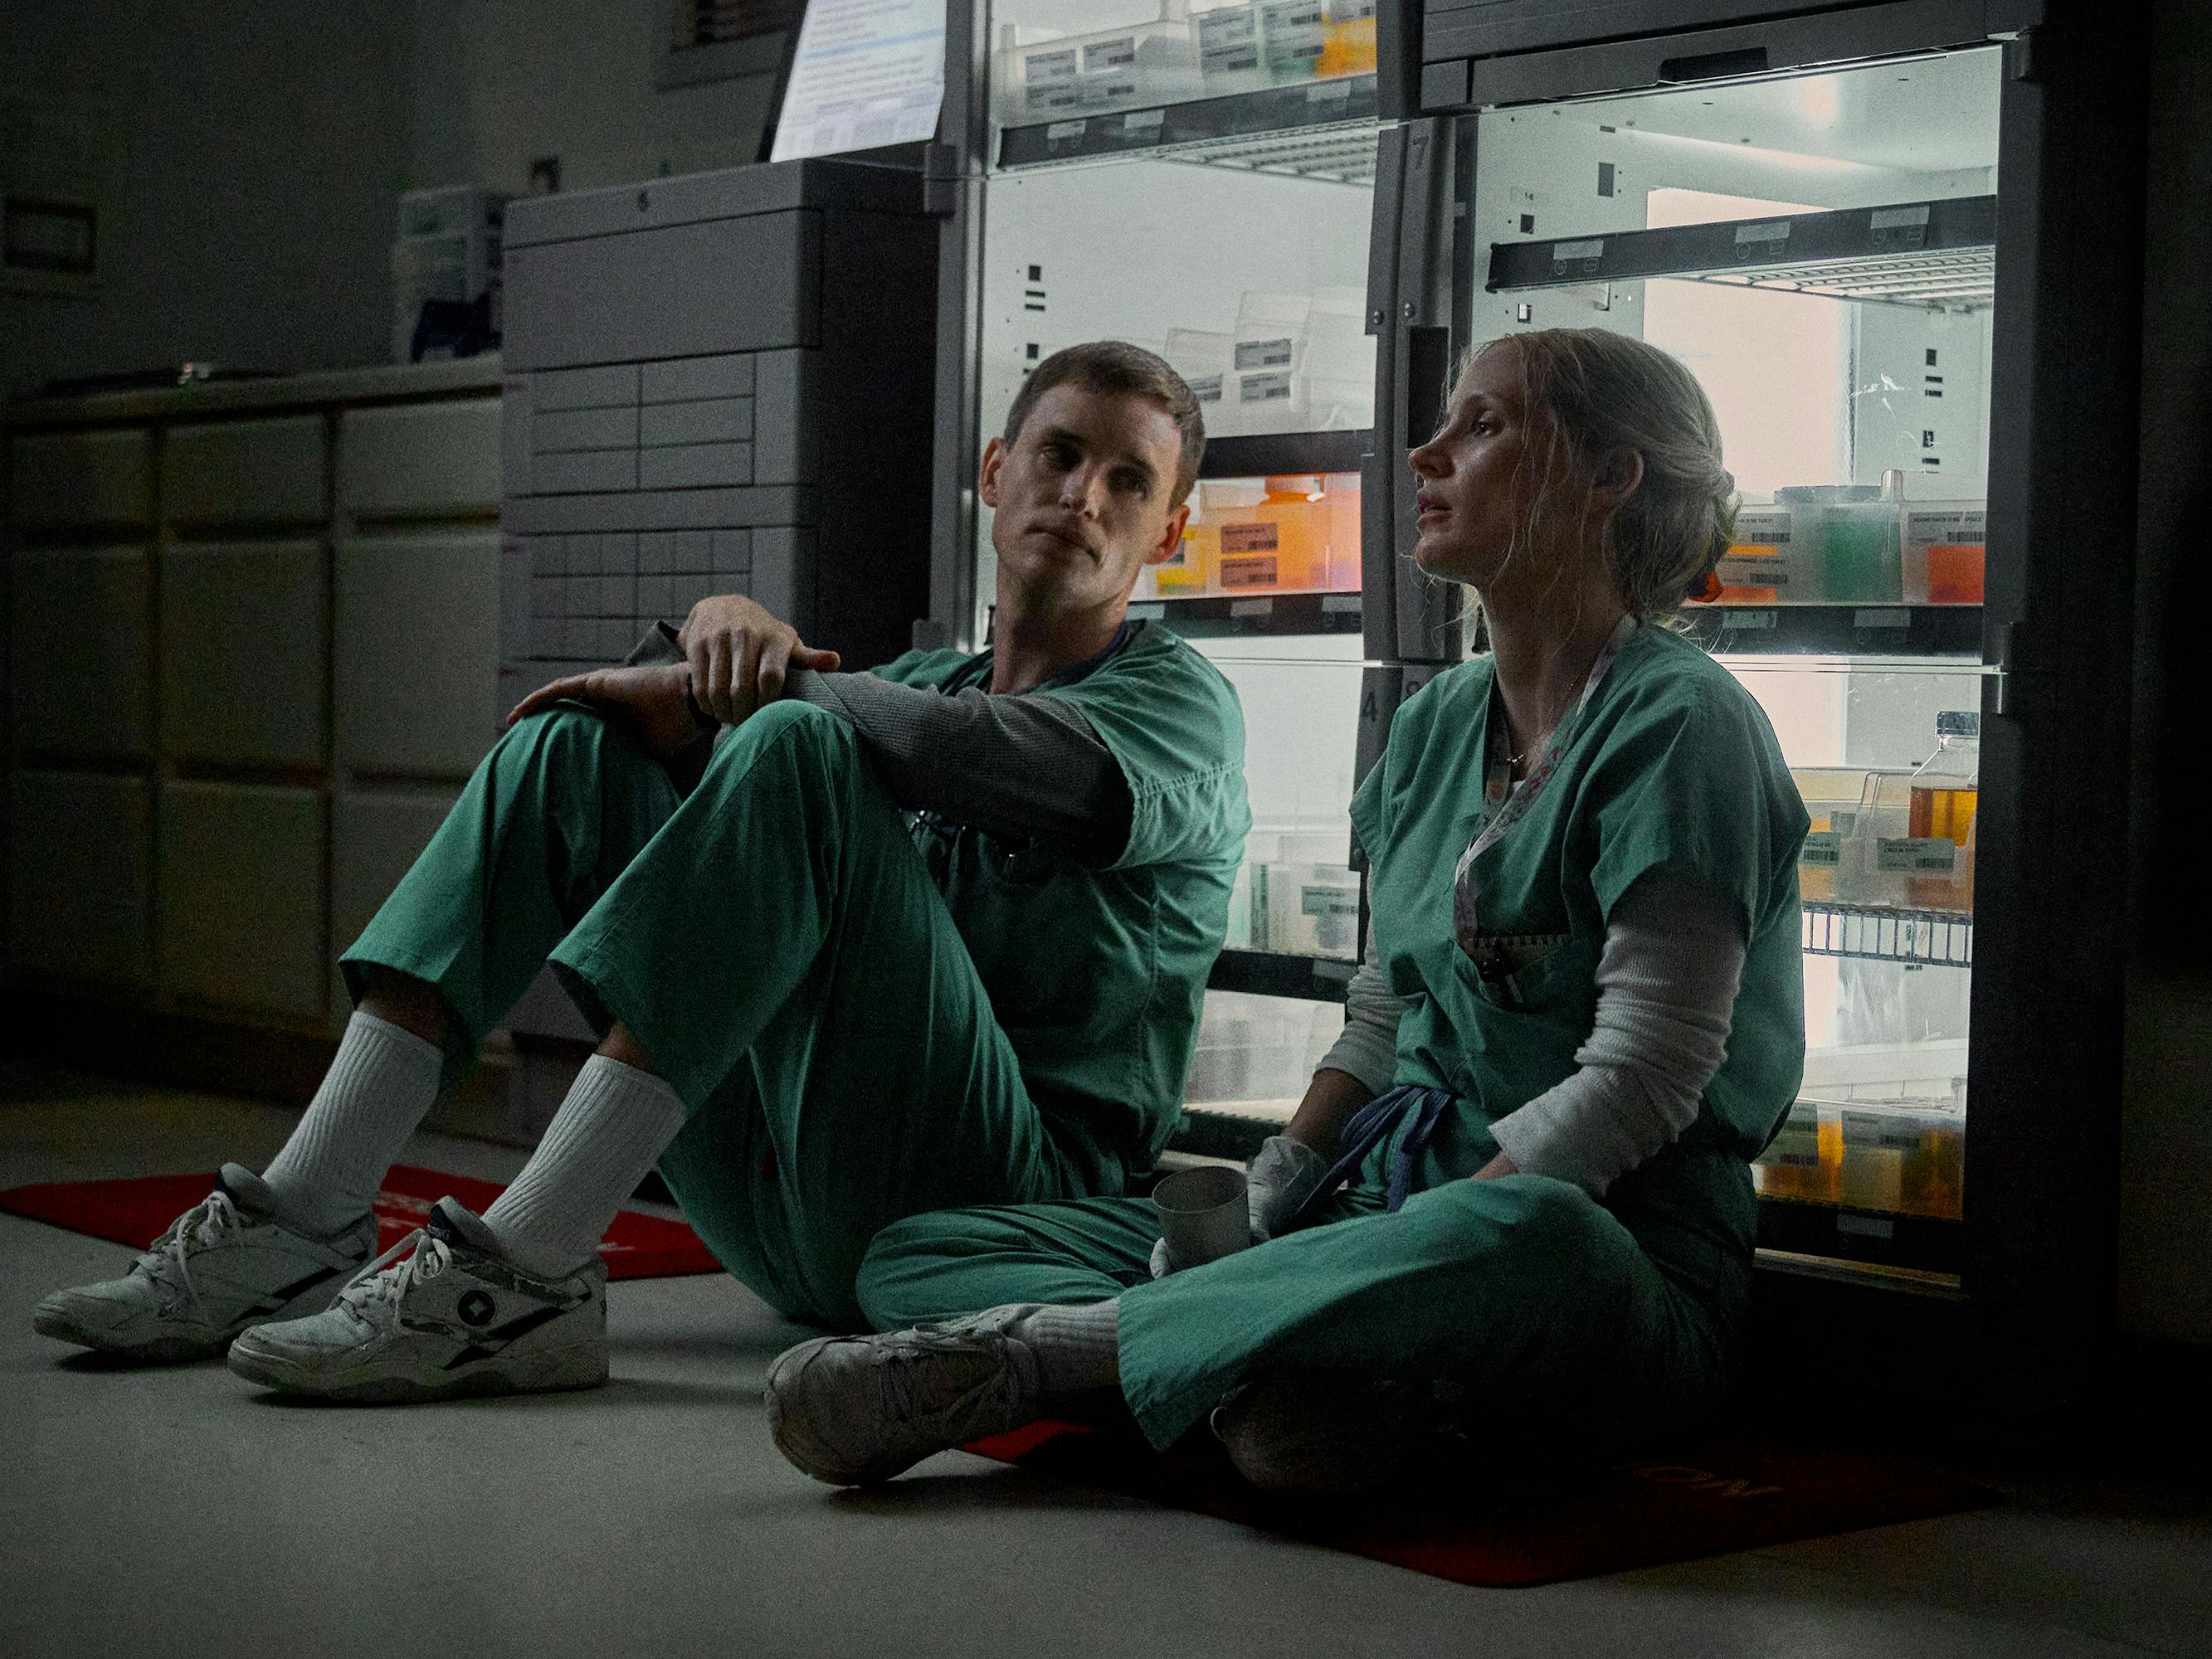 Charles Cullen (Eddie Redmayne) and Amy Loughren (Jessica Chastain) wear teal scrubs and sit against a medicine cabinet in a darkened hospital.